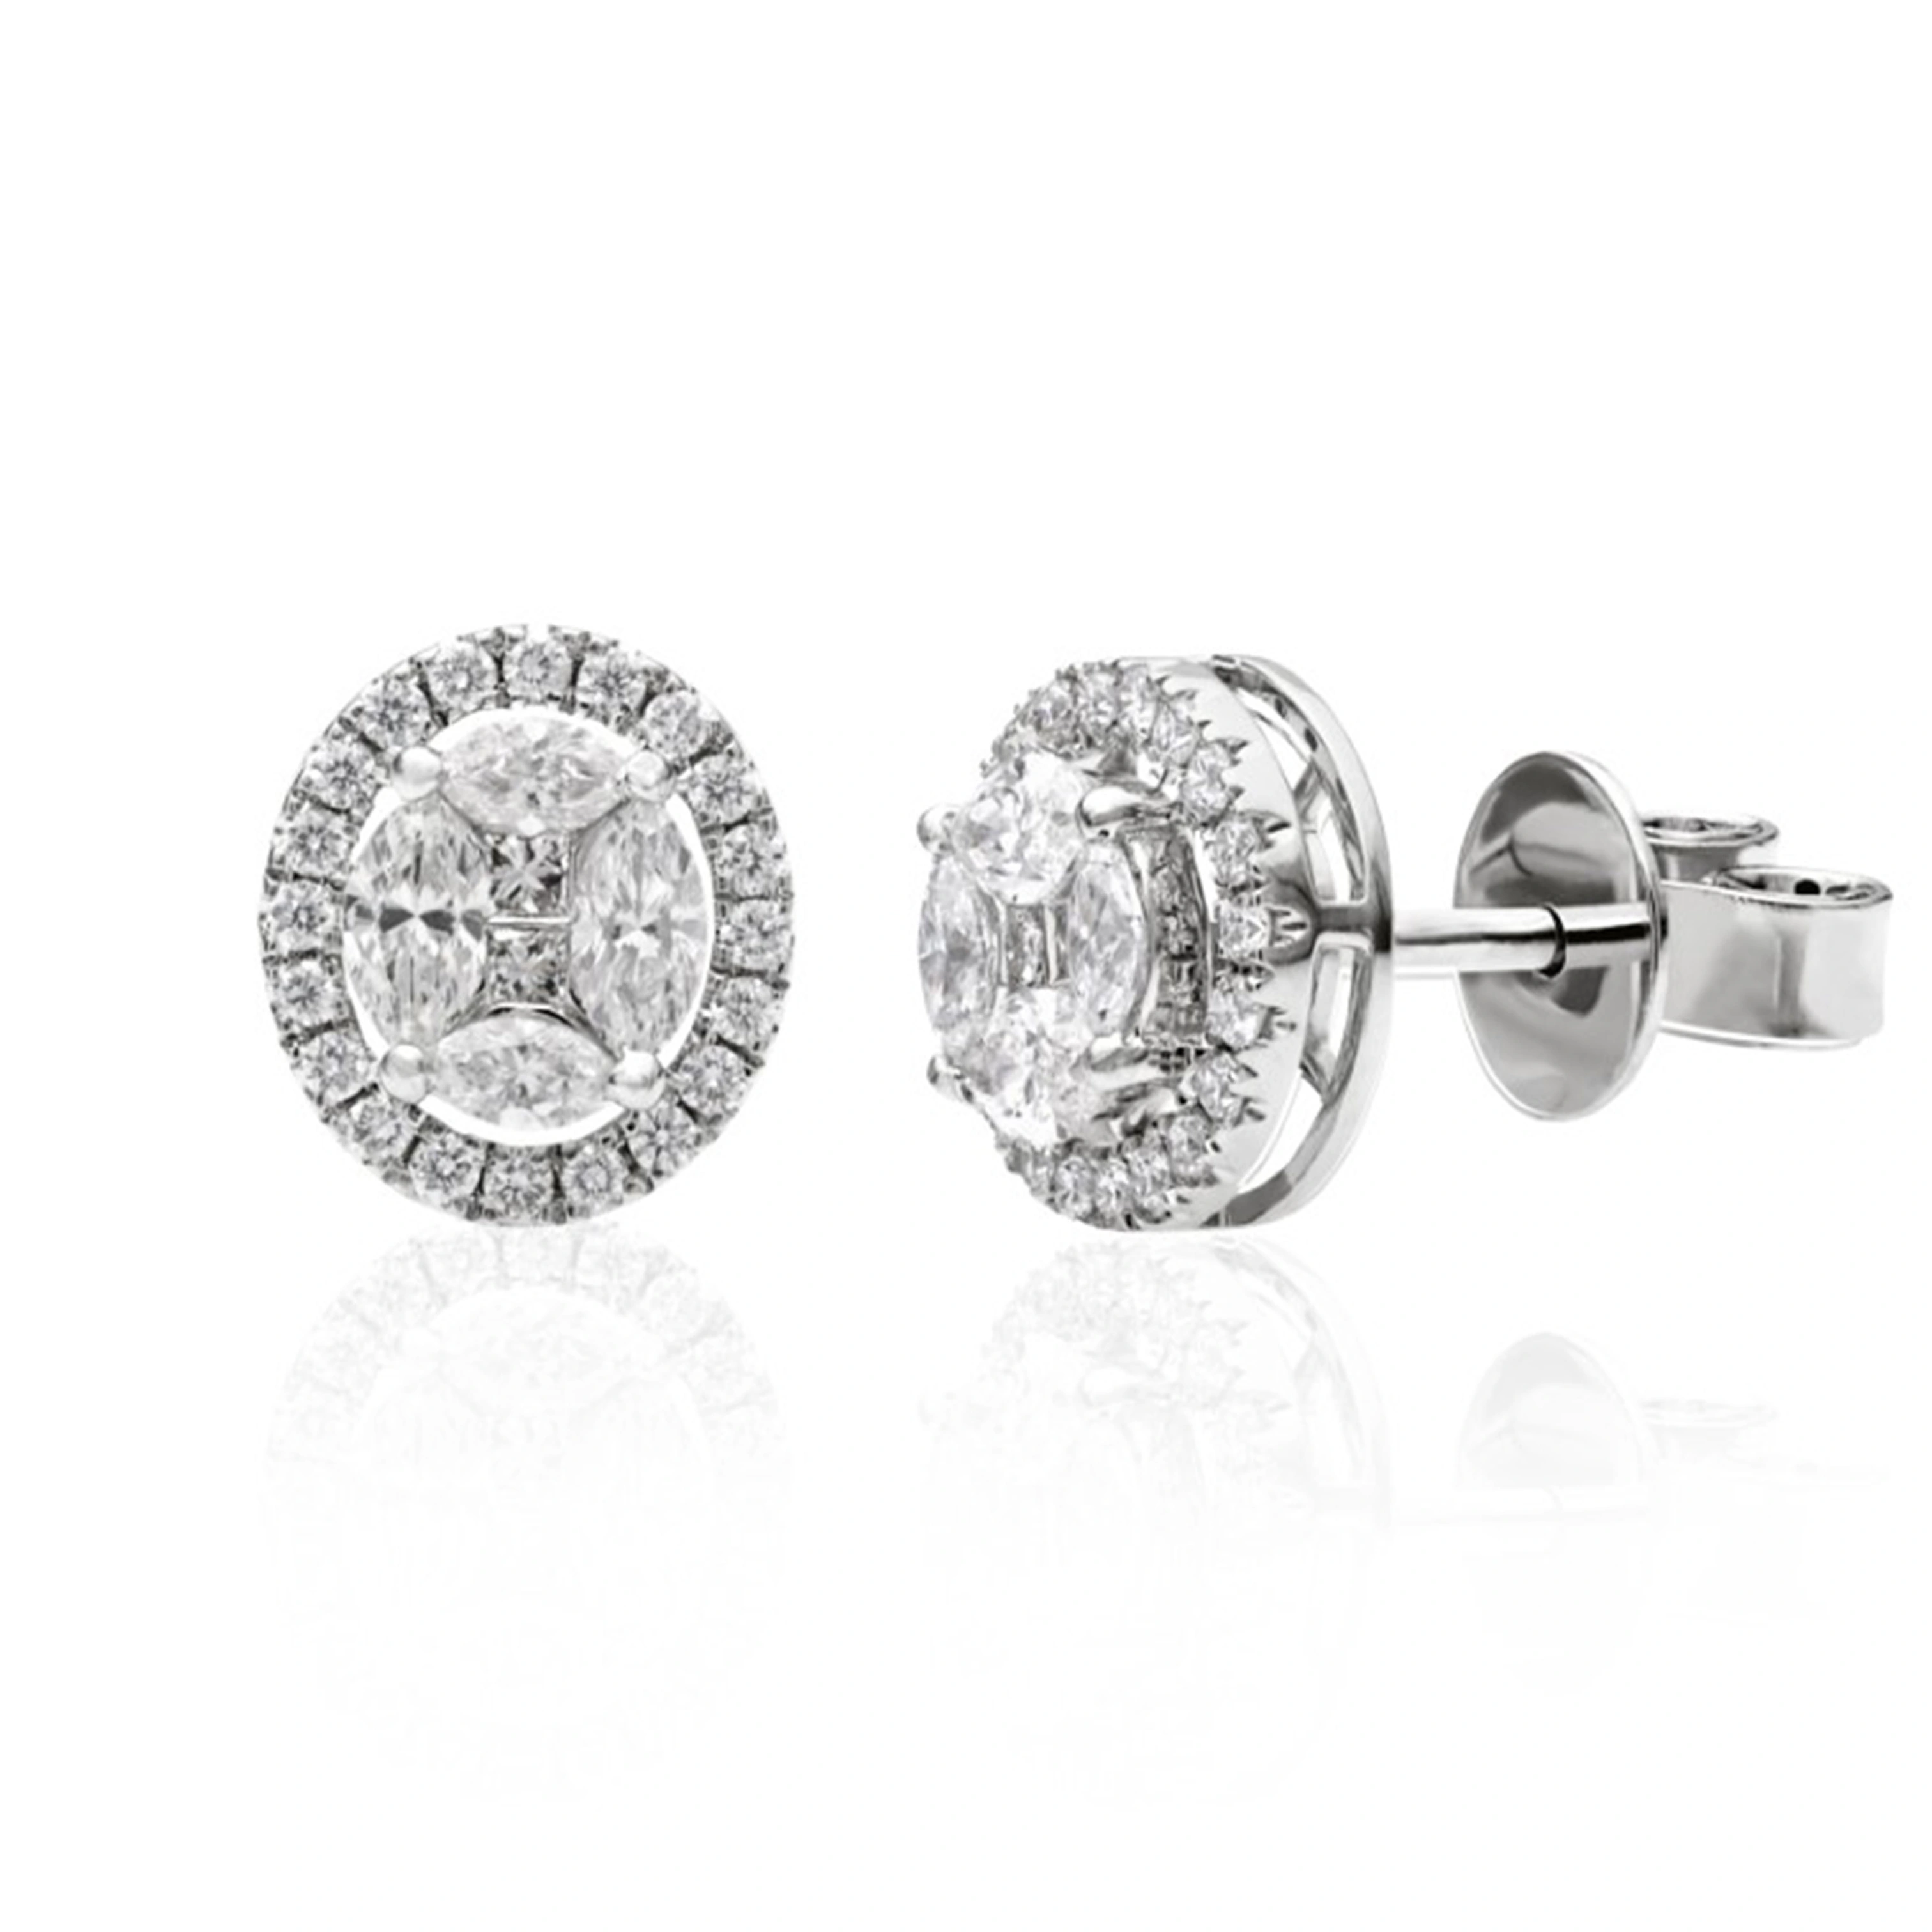 Choosing the Perfect Earrings for Different Occasions in Dubai!